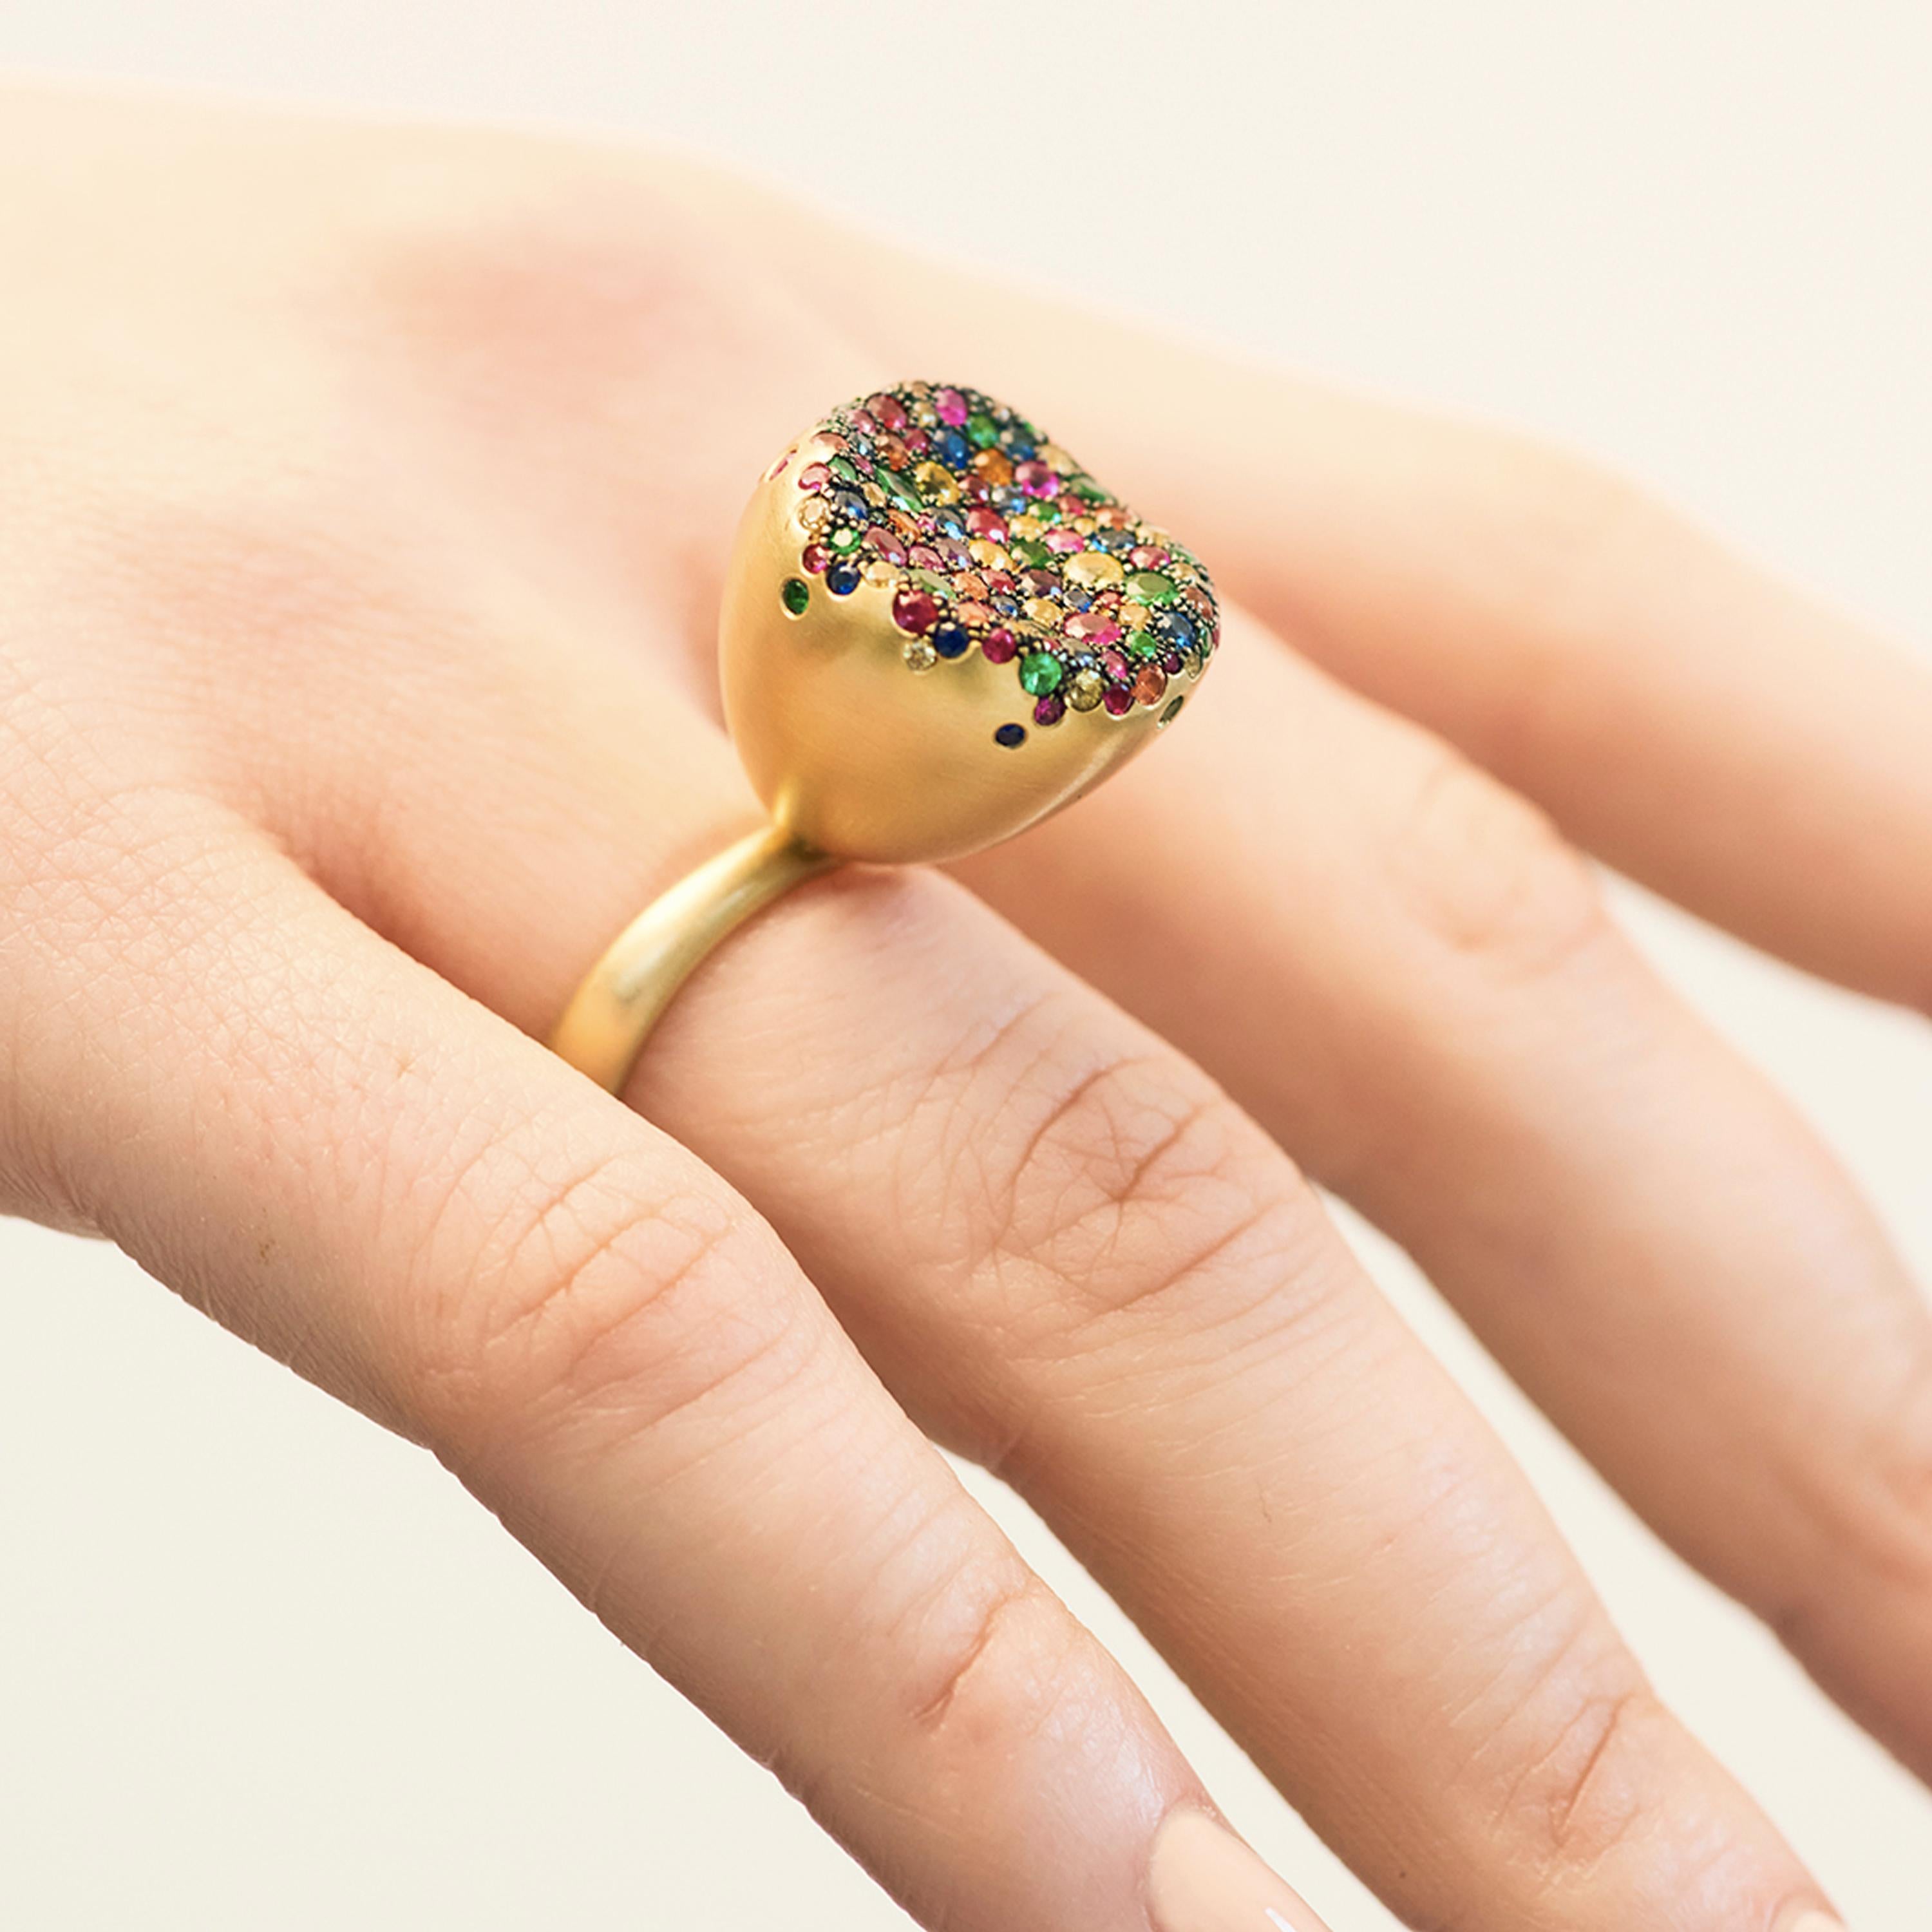 Nada Ghazal’s Baby Malak Flourish Bonbon Big Ring is soft in its form and finish. Subtly referencing a marquise cut in its shape, the brushed finish applied to the surface of the gold compliments the organic form of the ring. Coloured sapphires,